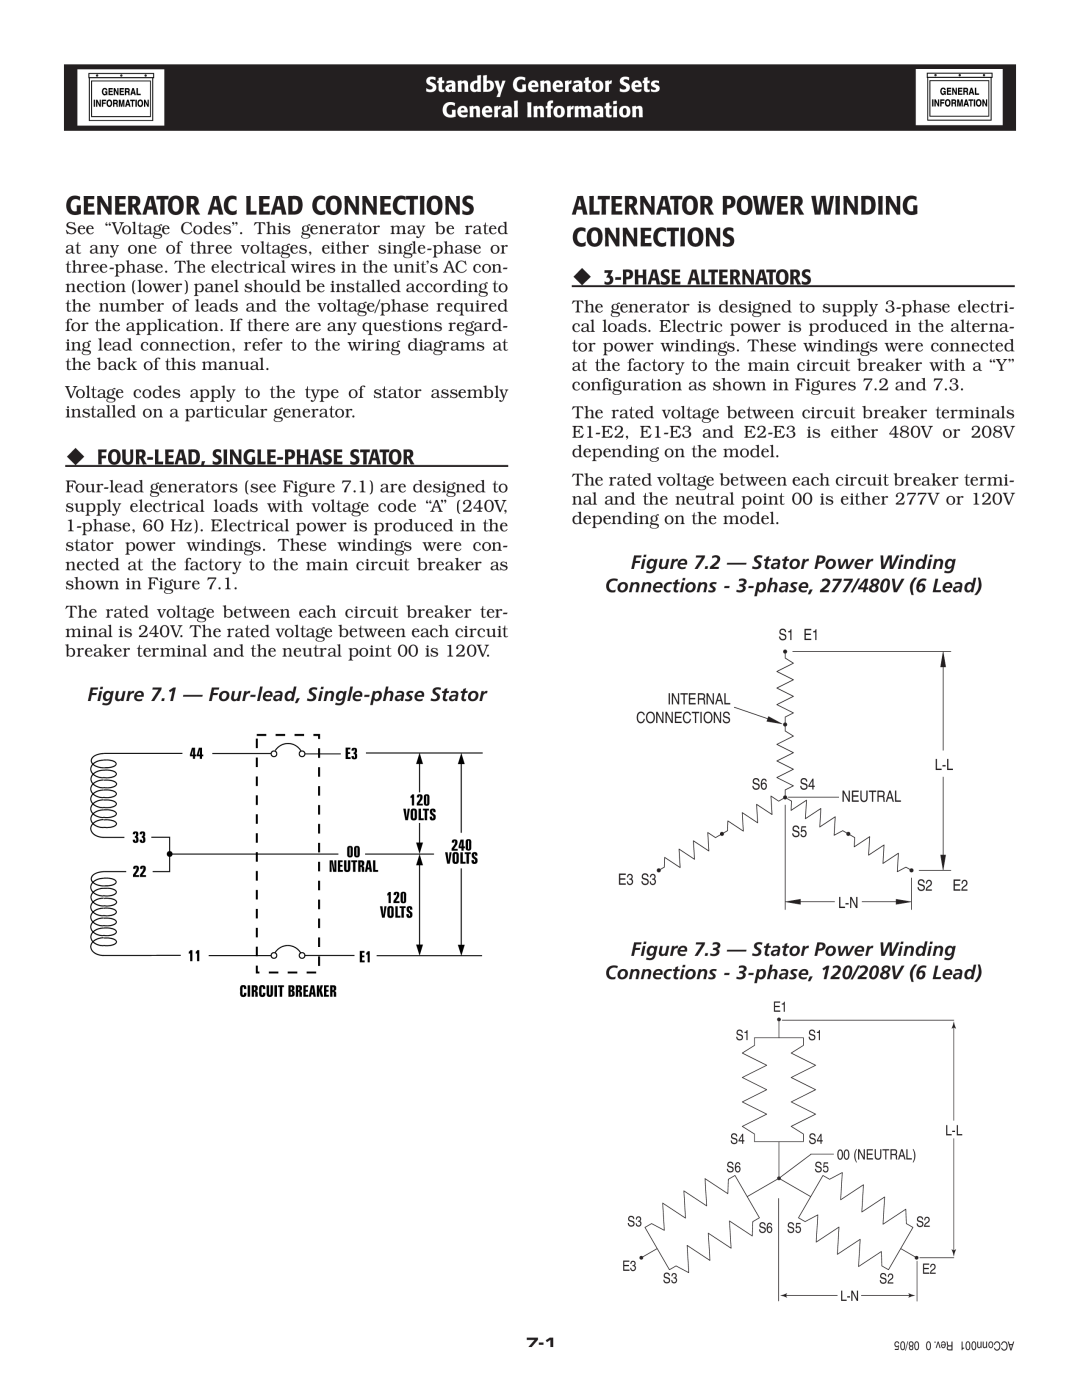 Guardian Technologies 005336-1, 005337-1 owner manual Generator Ac Lead Connections, Alternator Power Winding Connections 